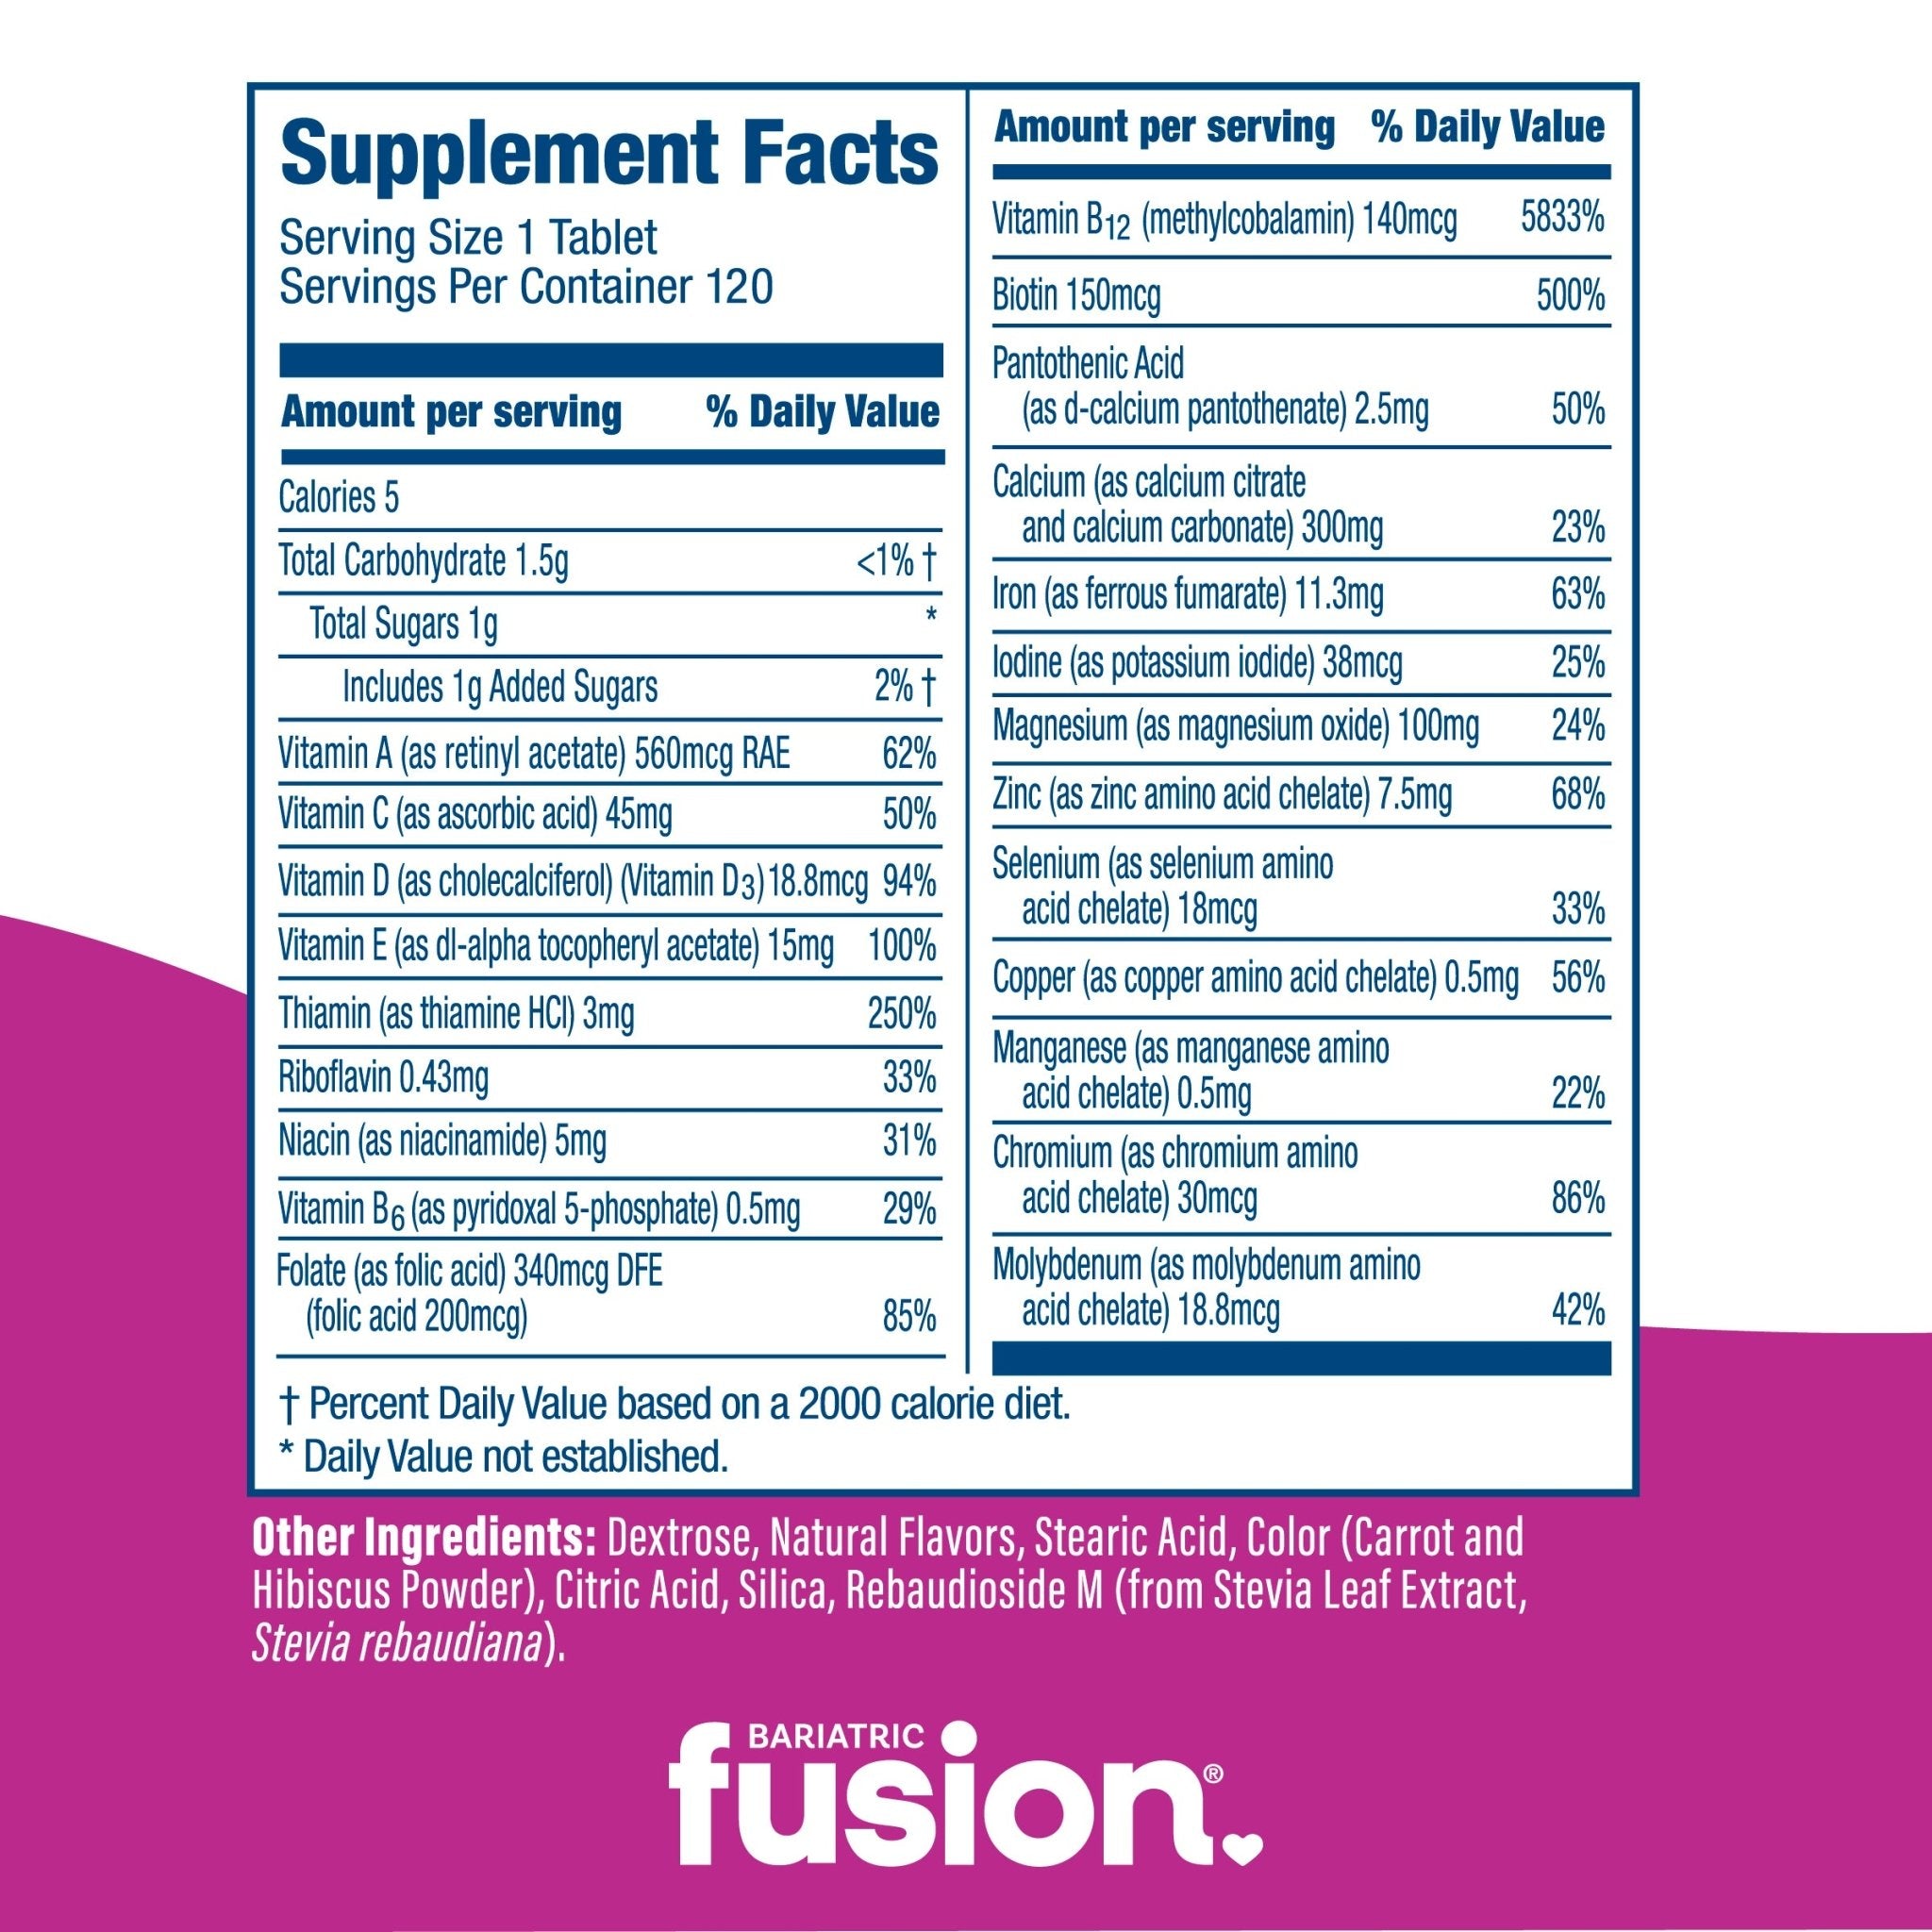 Bariatric Fusion Mixed Berry Complete Chewable Bariatric Multivitamin supplement facts.